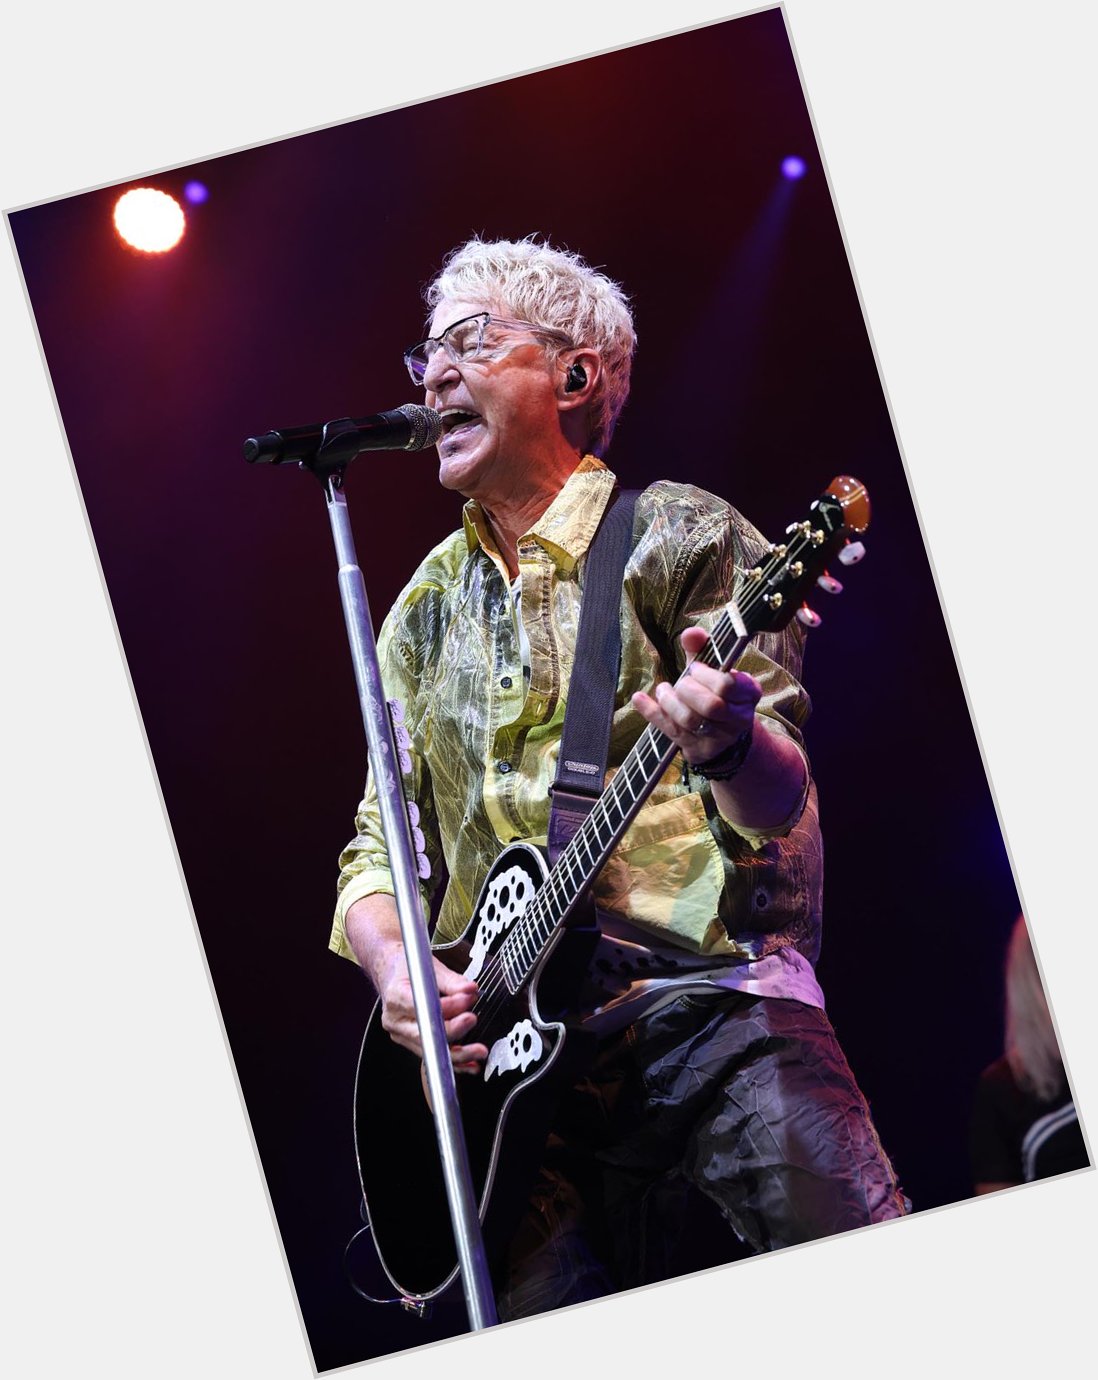 Sending all the birthday wishes to  Kevin Cronin of today! Happy birthday to you 